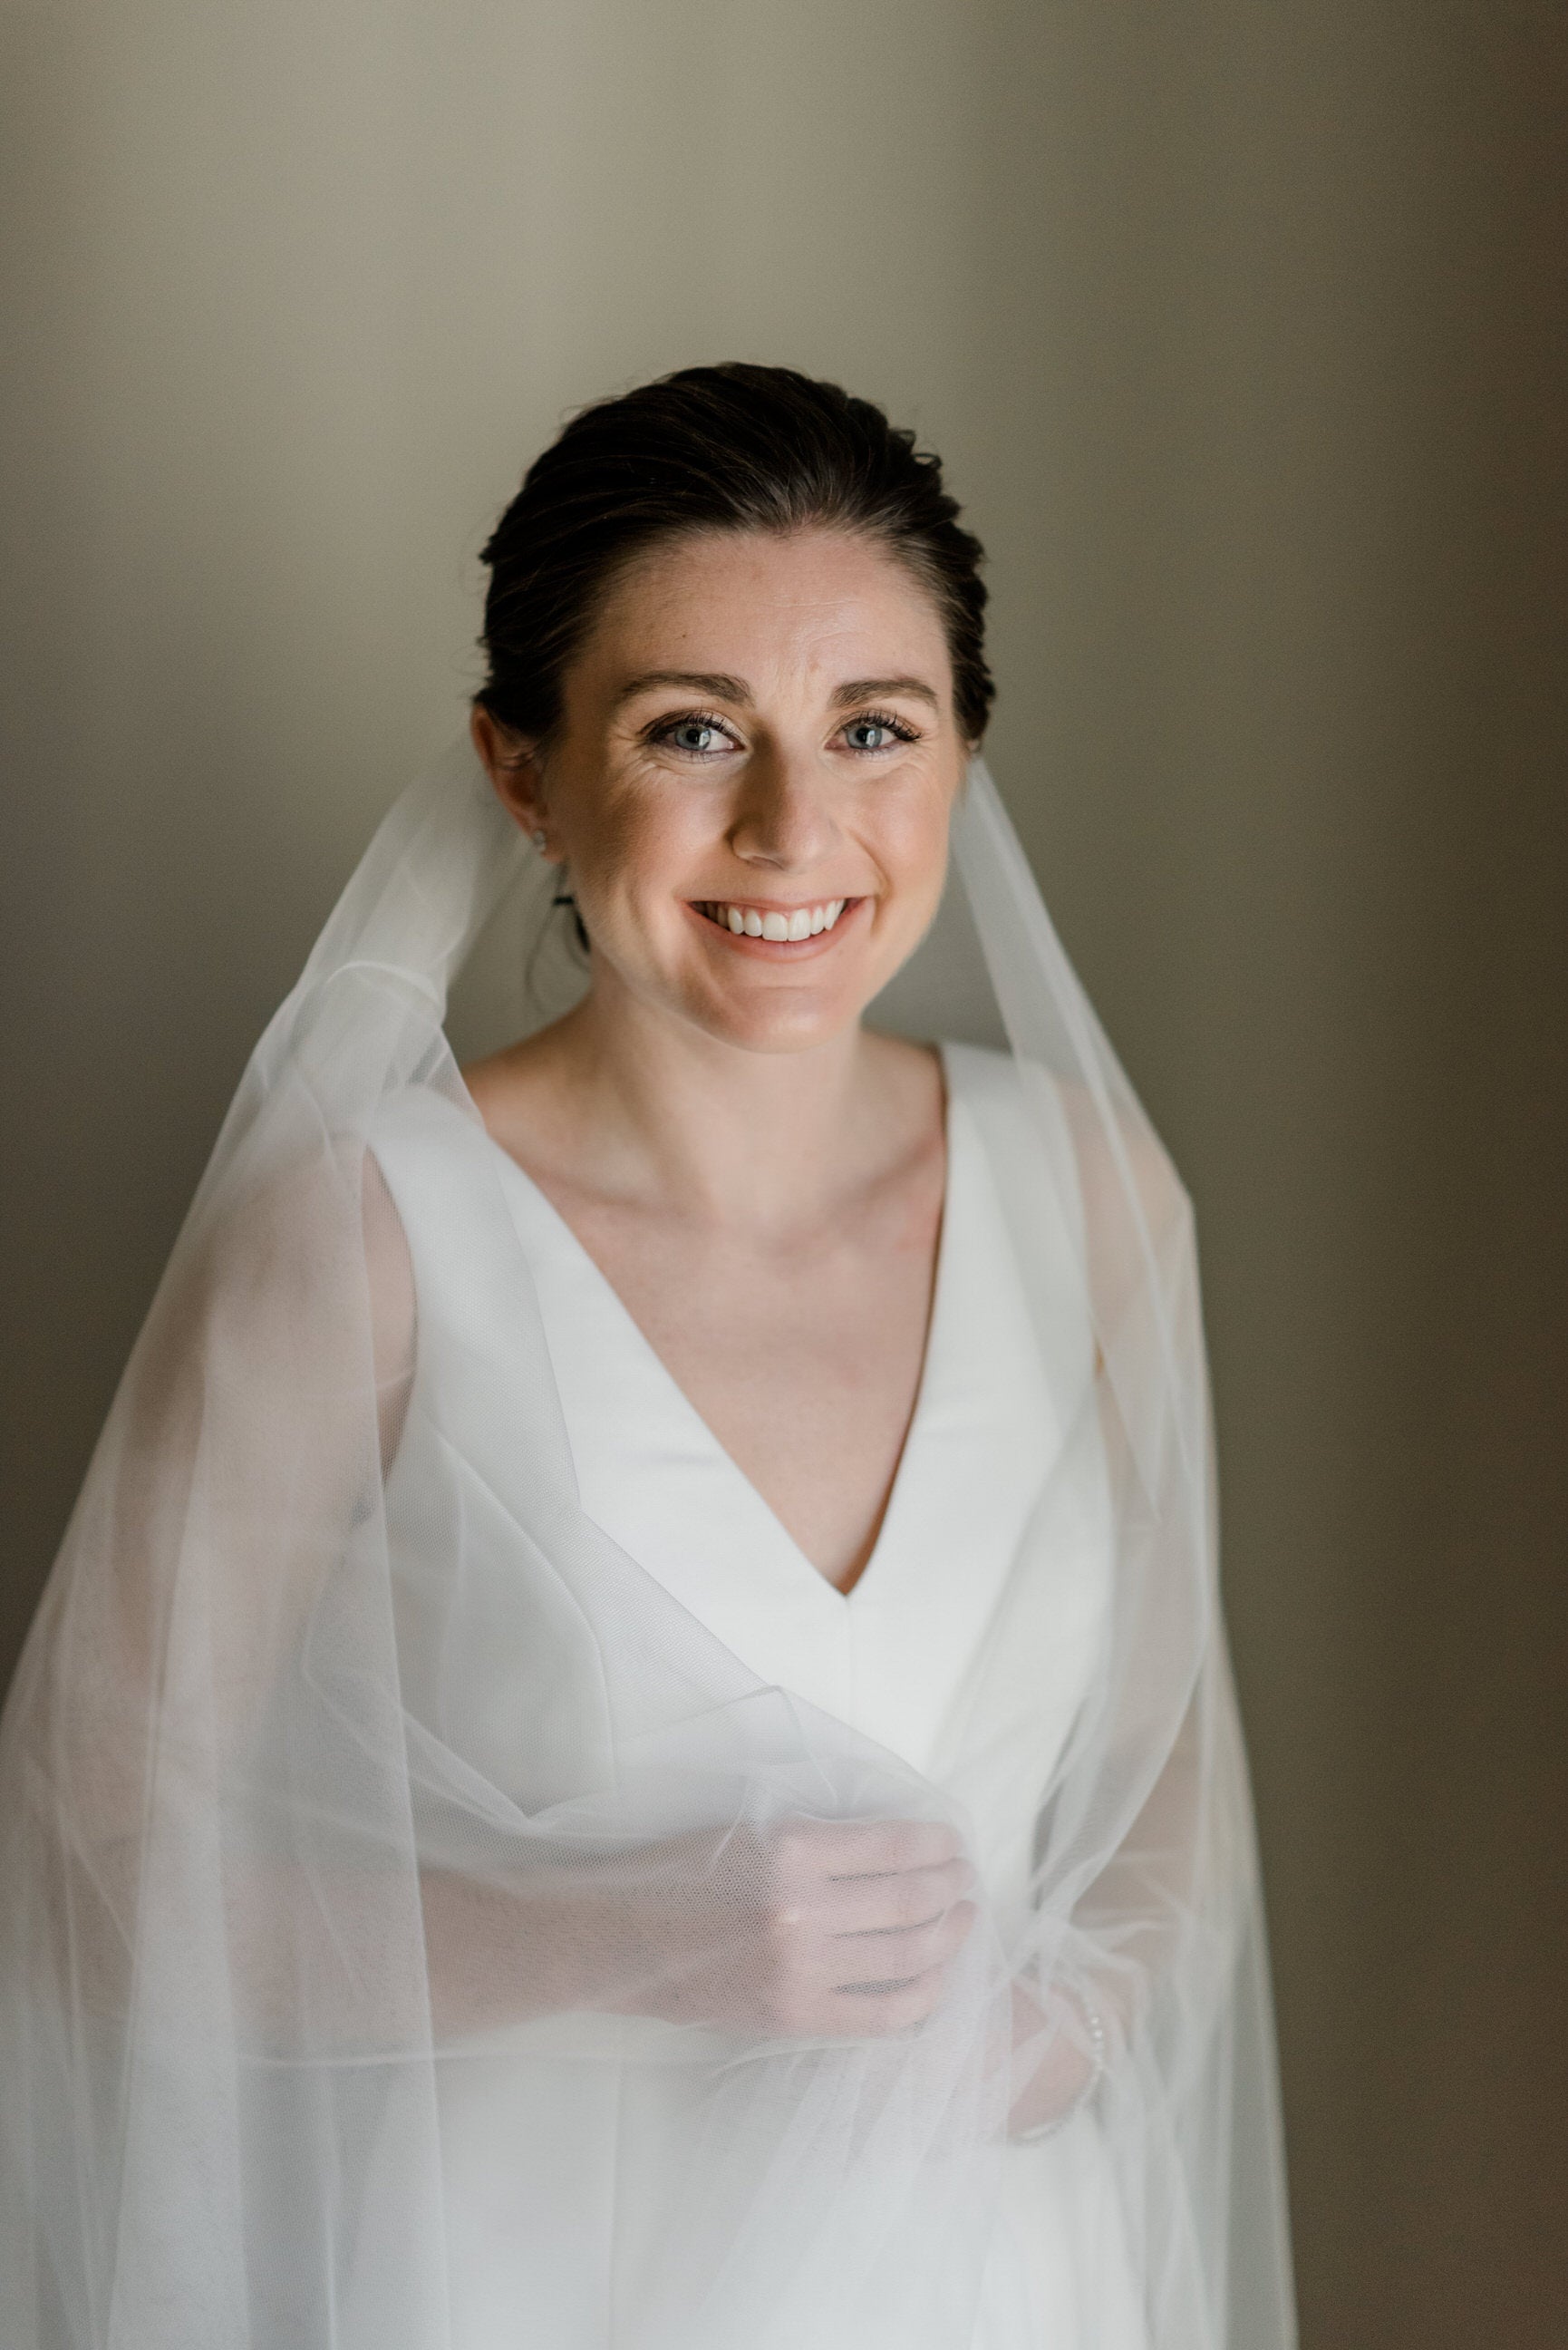 English tulle wedding veil for classic bride